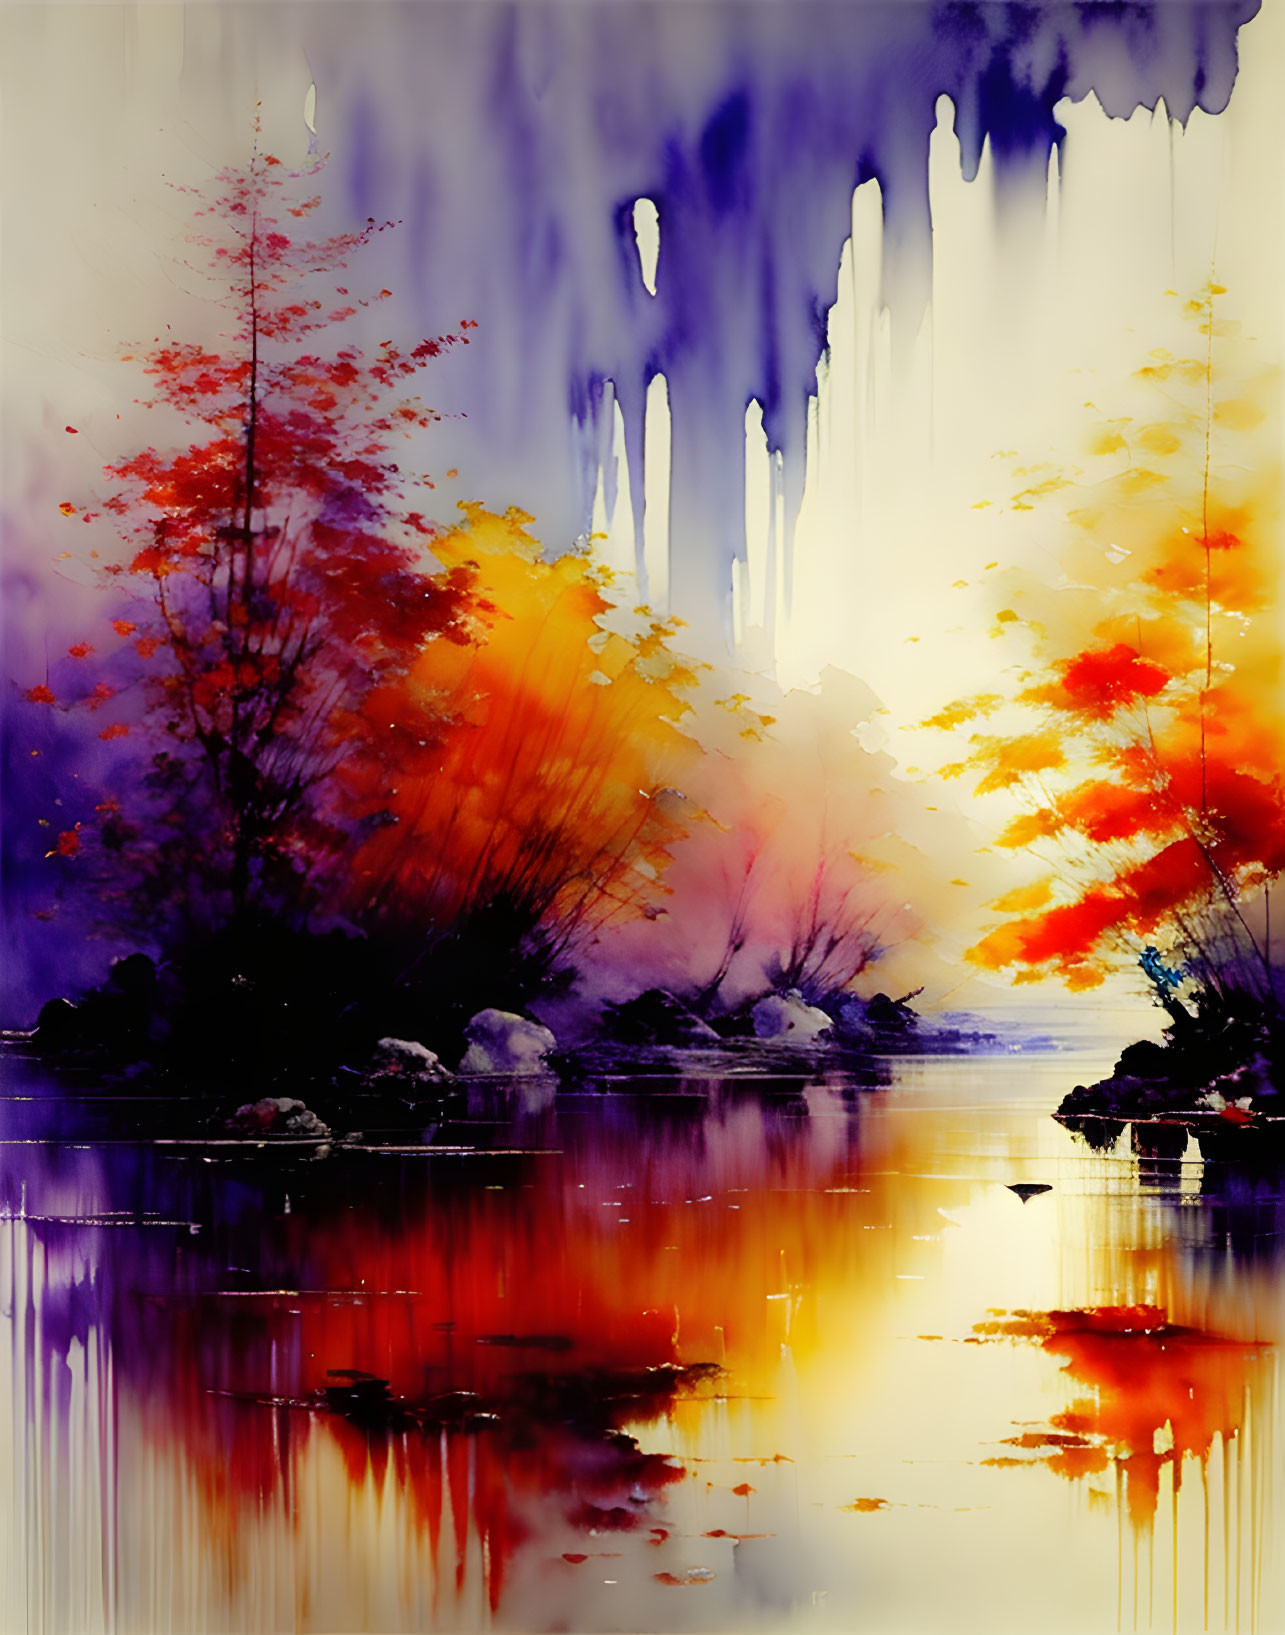 Vibrant Watercolor Landscape of Autumnal Trees Reflected on Lake